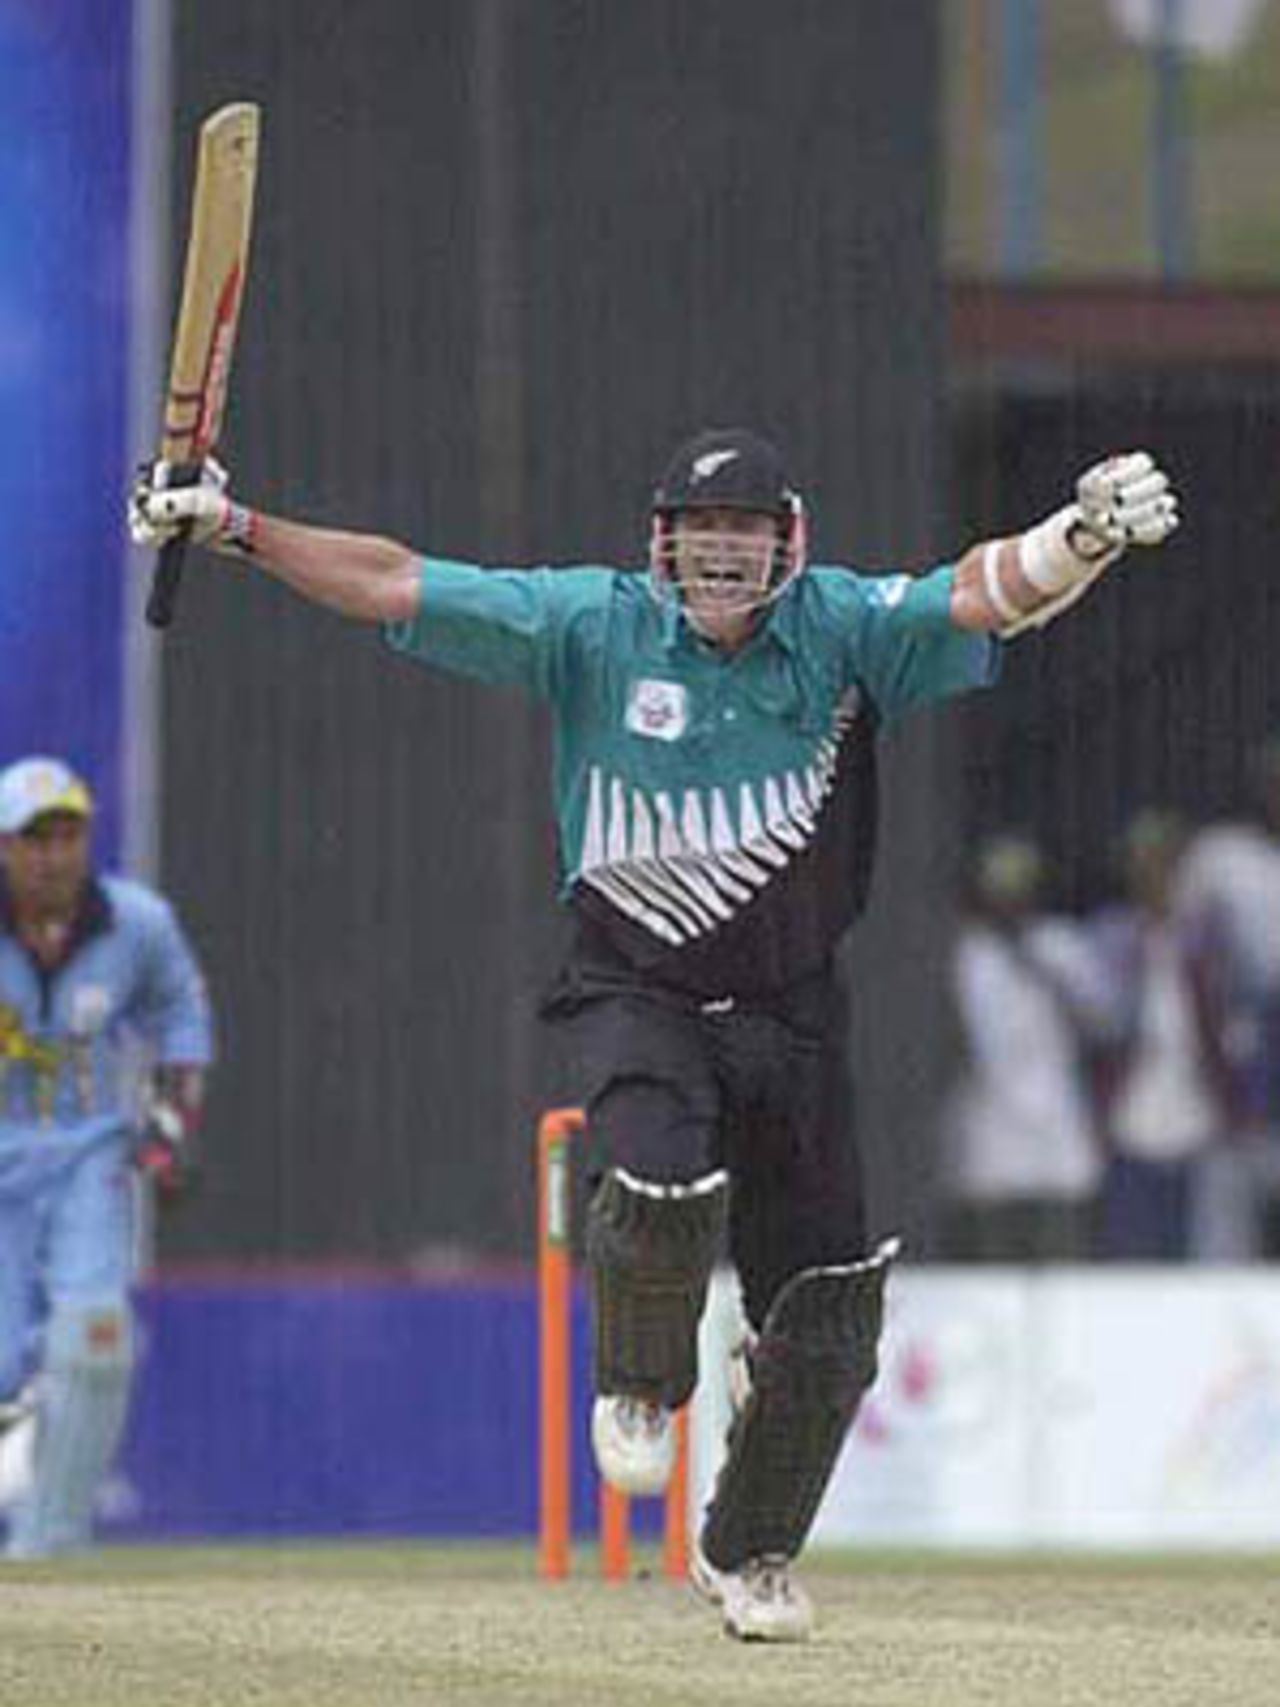 A jubiliant Cairns runs back to the pavilion after hitting the winning runs, ICC KnockOut, 2000/01, Final, India v New Zealand, Gymkhana Club Ground, Nairobi, 15 October 2000.